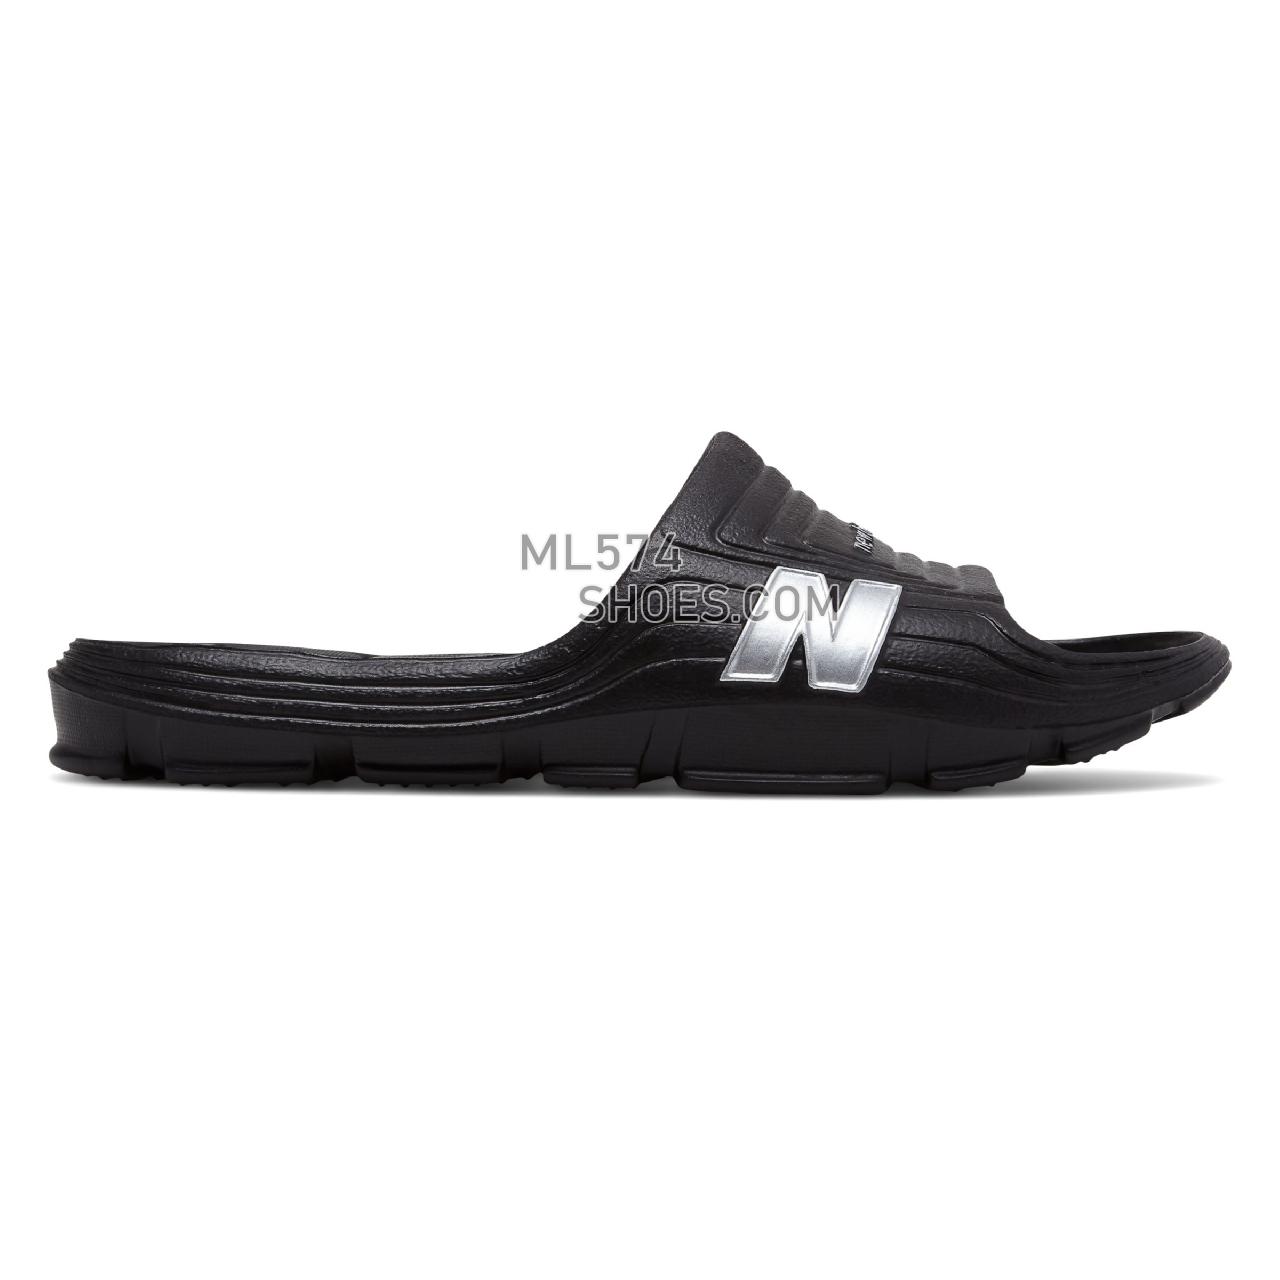 New Balance Float Slide - Men's 106 - Sandals Black with Silver - SD106BS